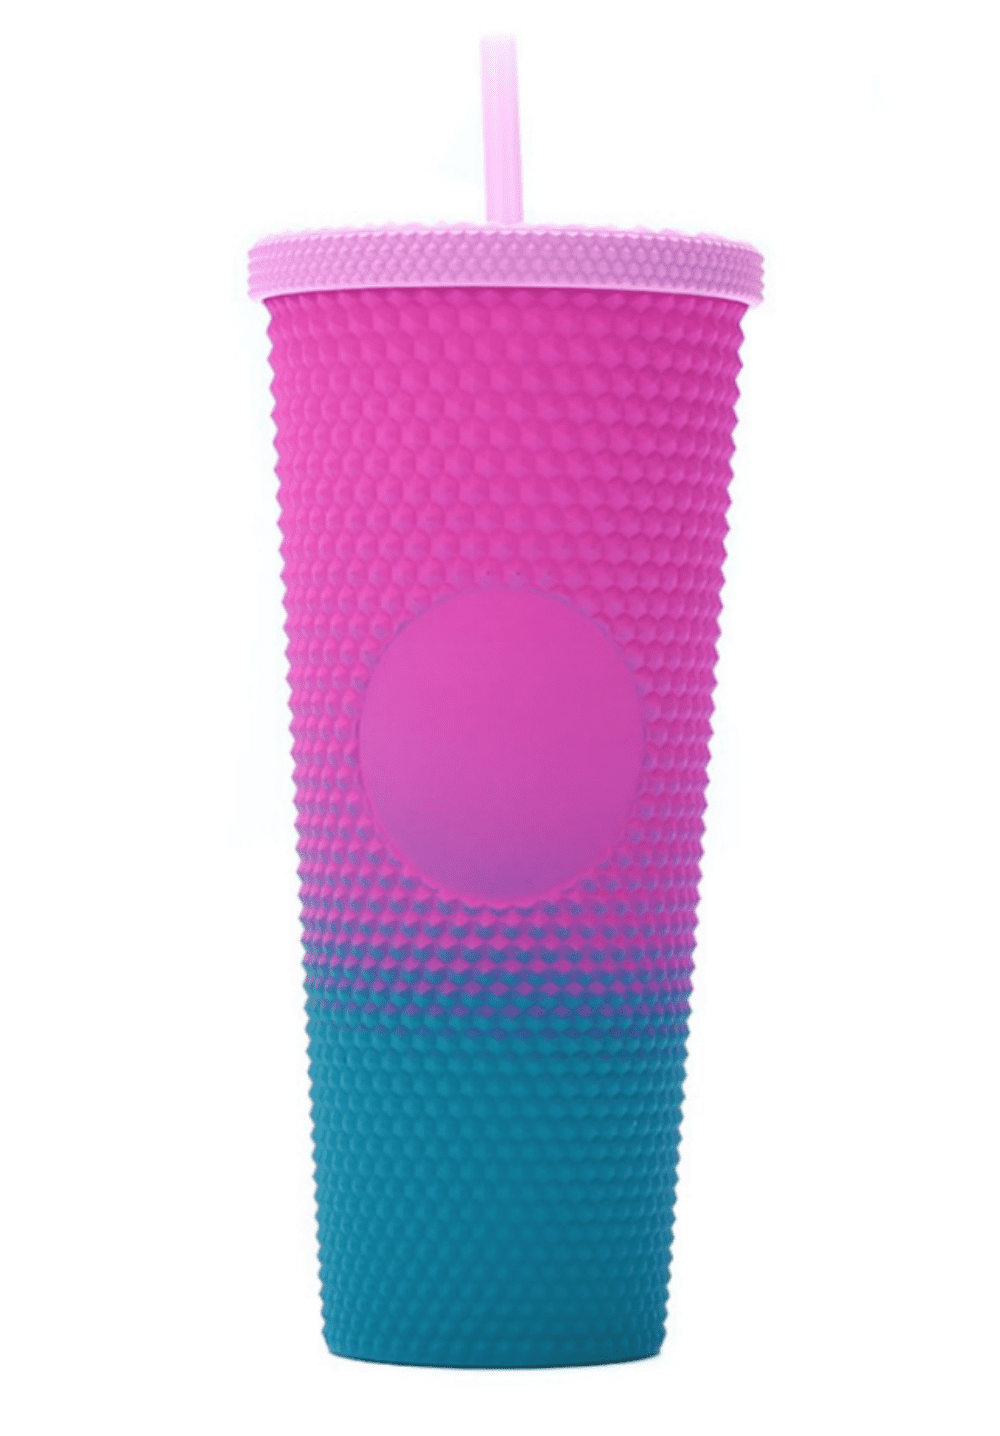 Hot Selling 24oz 20oz 16oz Pink Studded Custom Logo in Bulk Plastic Tumbler  Cold Coffee Mug Tumblers Cups with Lids and Straws - China Pineapple Cup  and Tumbler Cup price